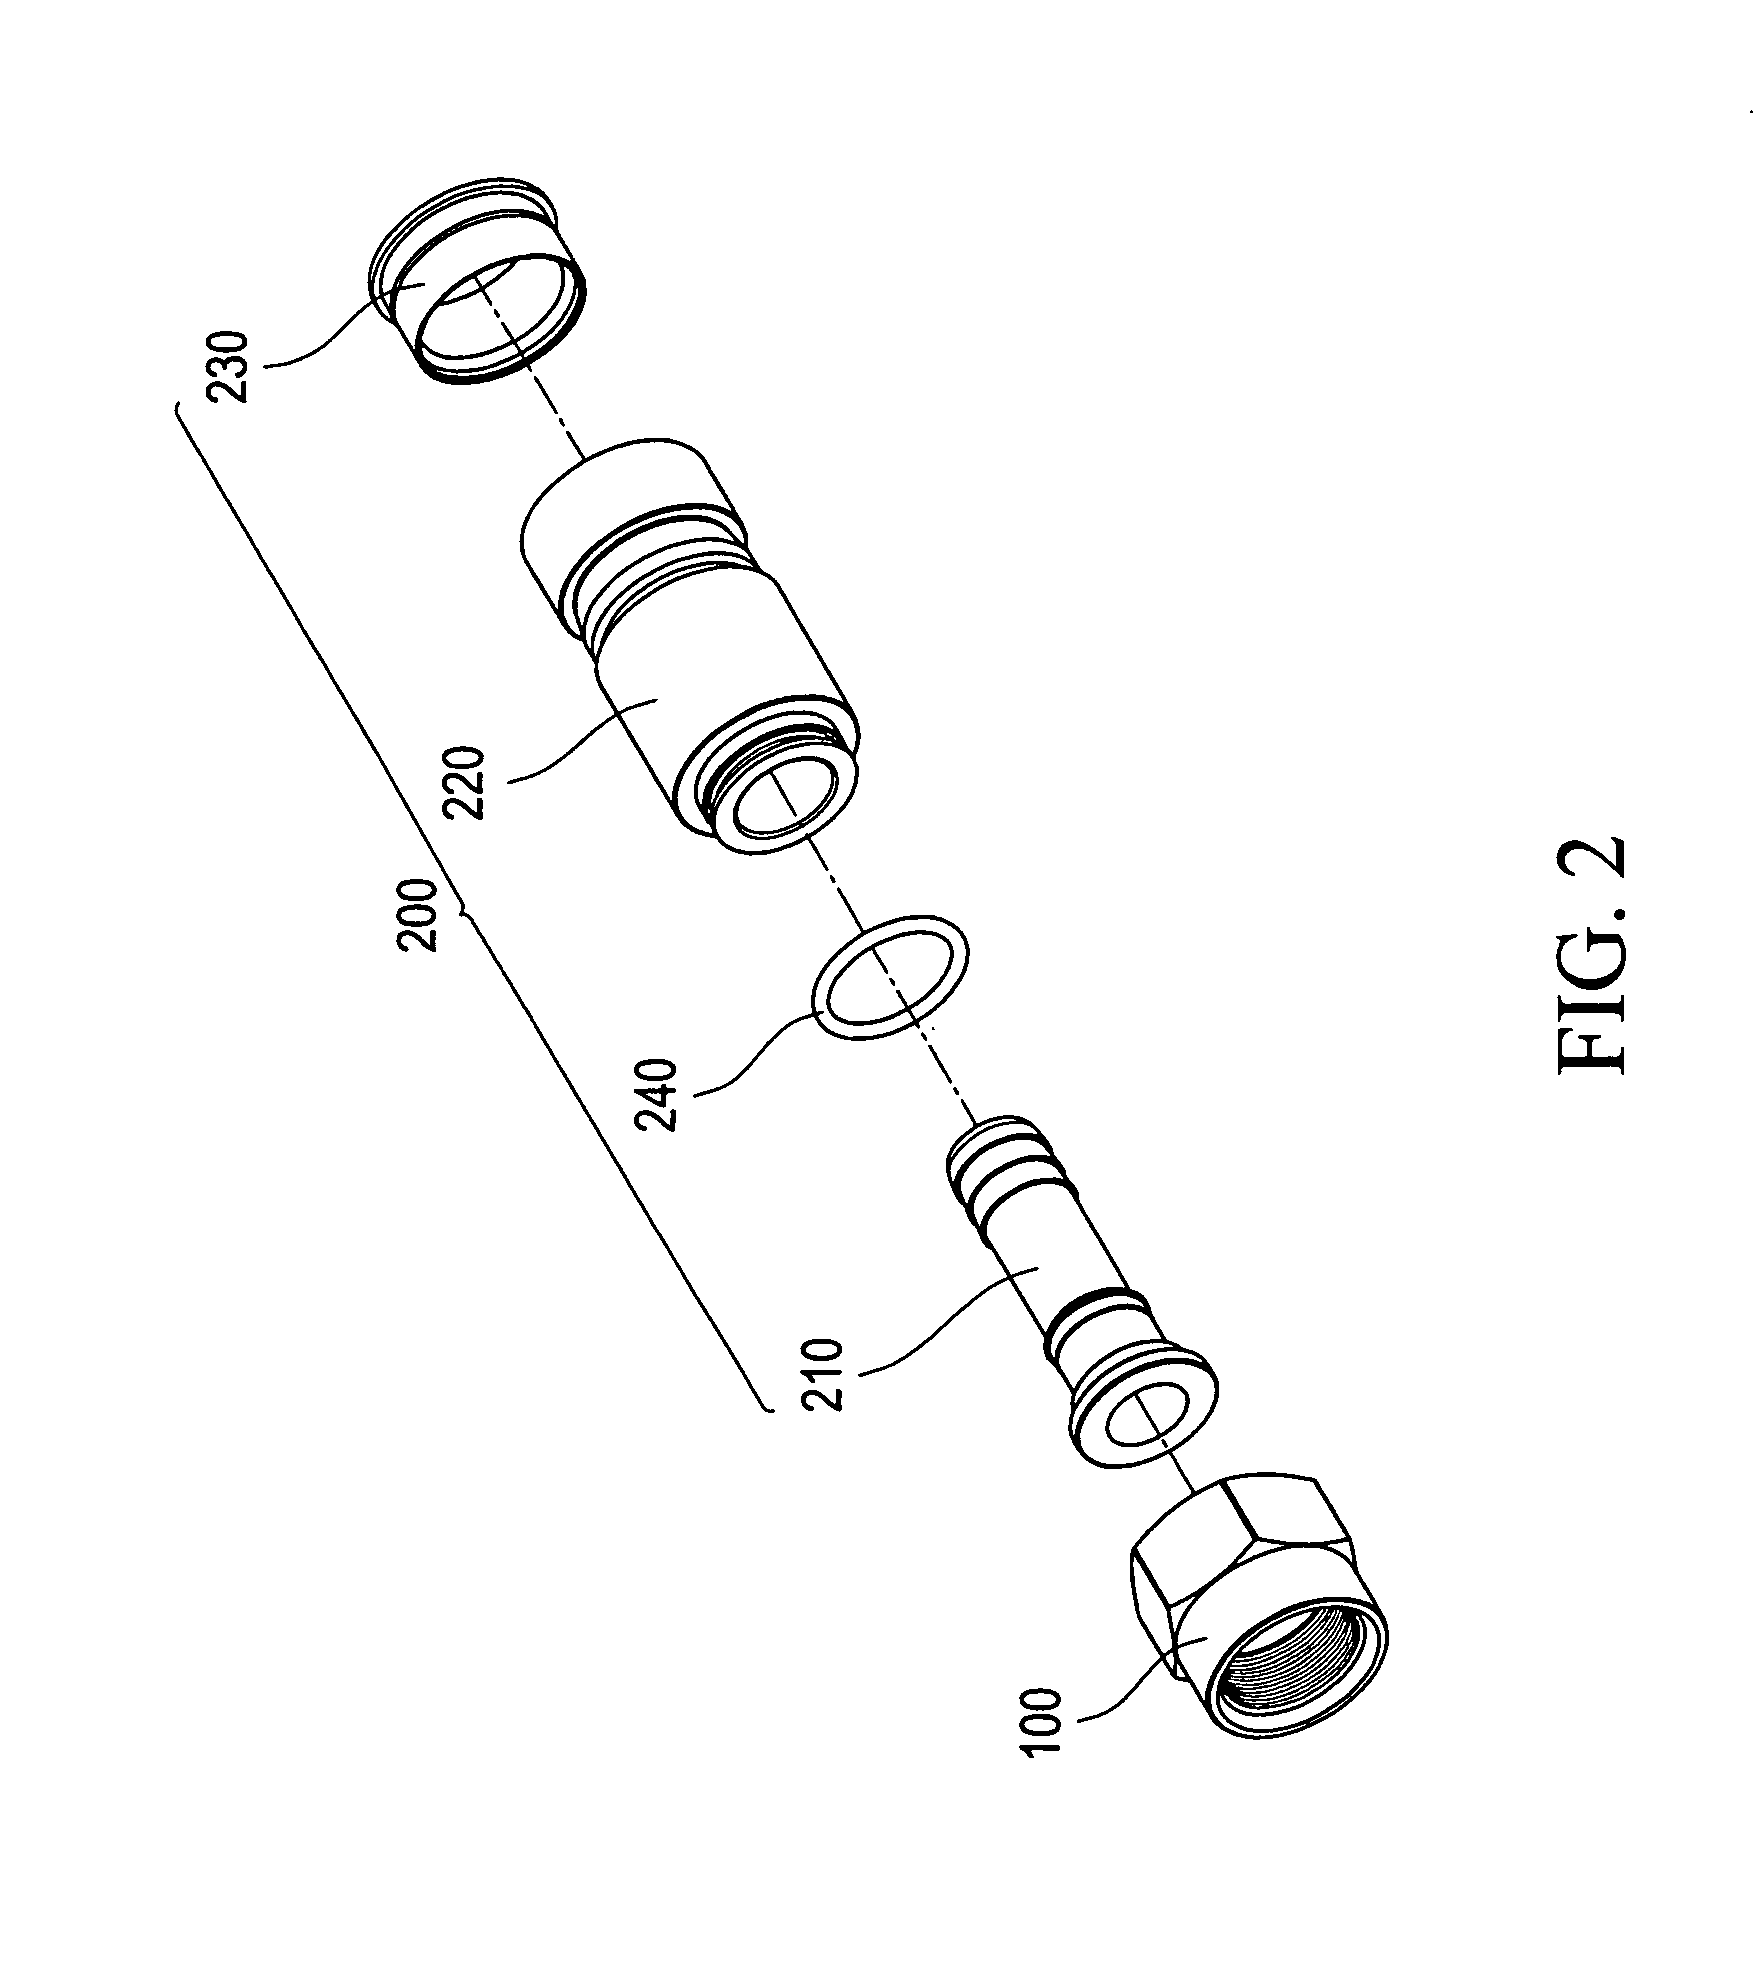 Coaxial cable connector enhancing tightness engagement with a coaxial cable